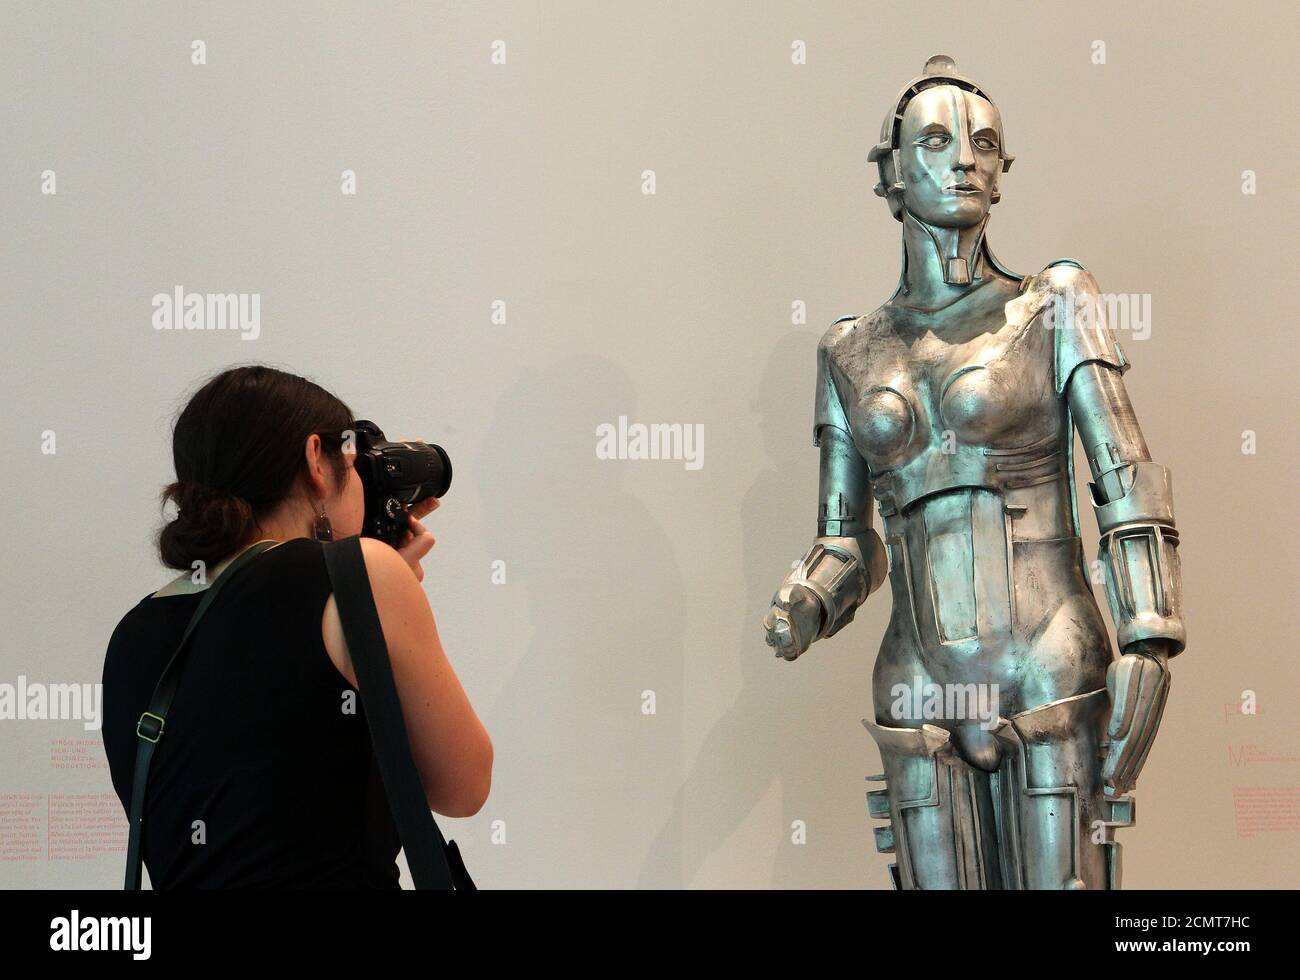 Metropolis Robot High Resolution Stock Photography and Images - Alamy